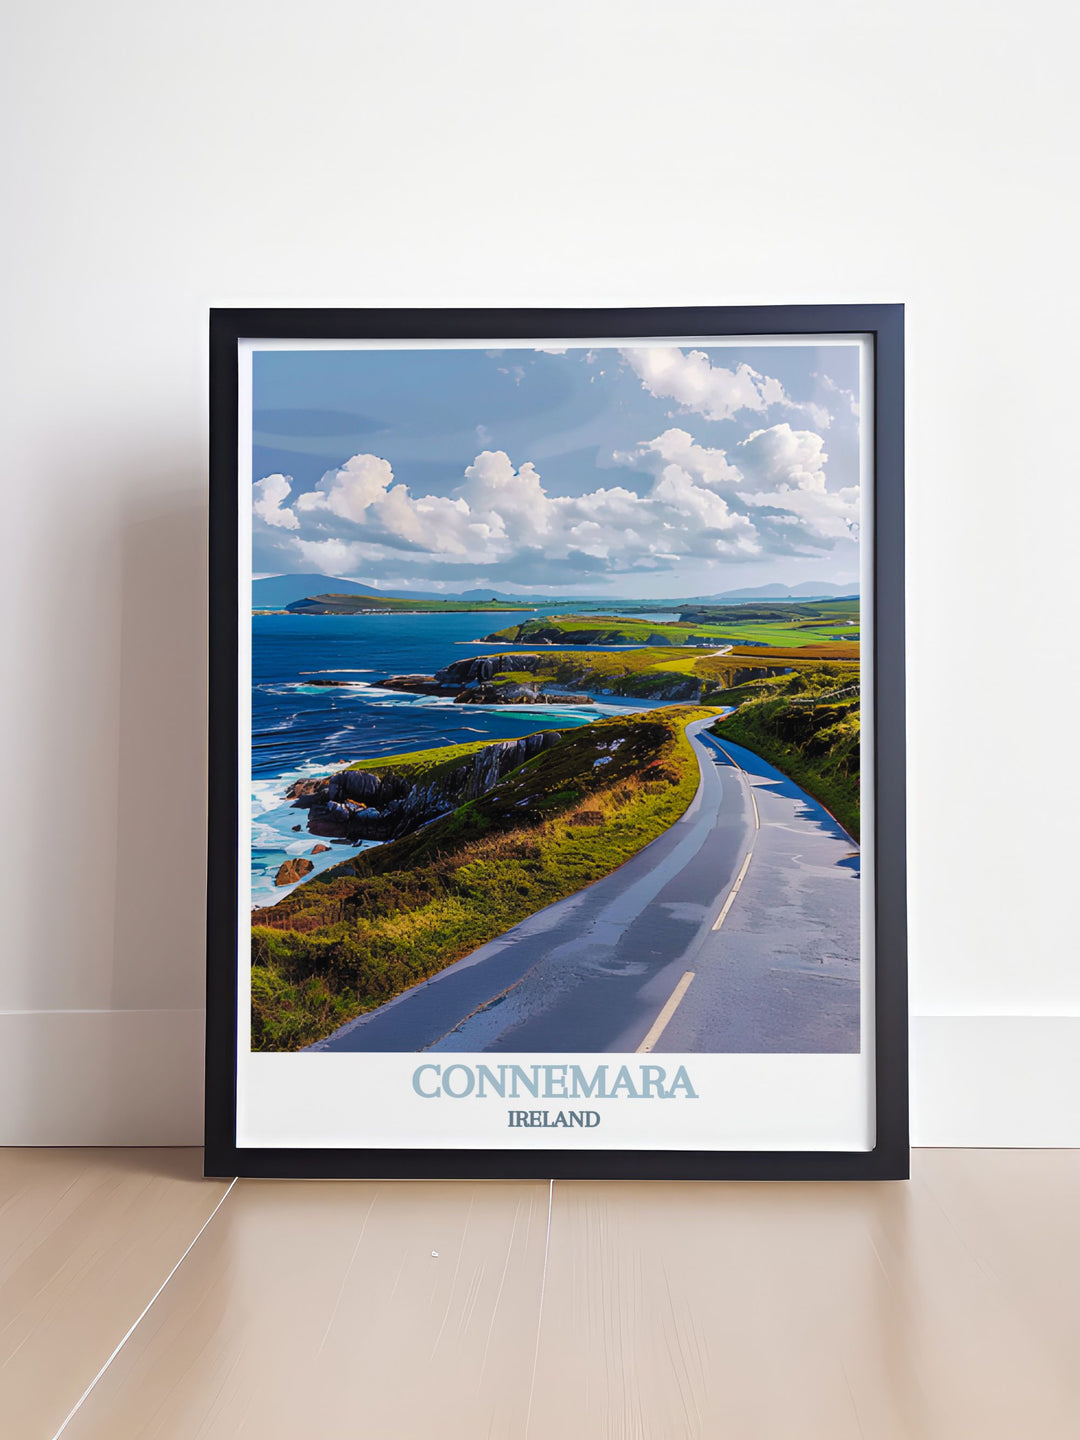 Discover the majestic vistas of the Sky Road in Connemara, where each twist and turn reveals new landscapes from lush green hills to rocky shores, providing unparalleled opportunities for capturing the wild and untamed beauty of Irelands west coast.